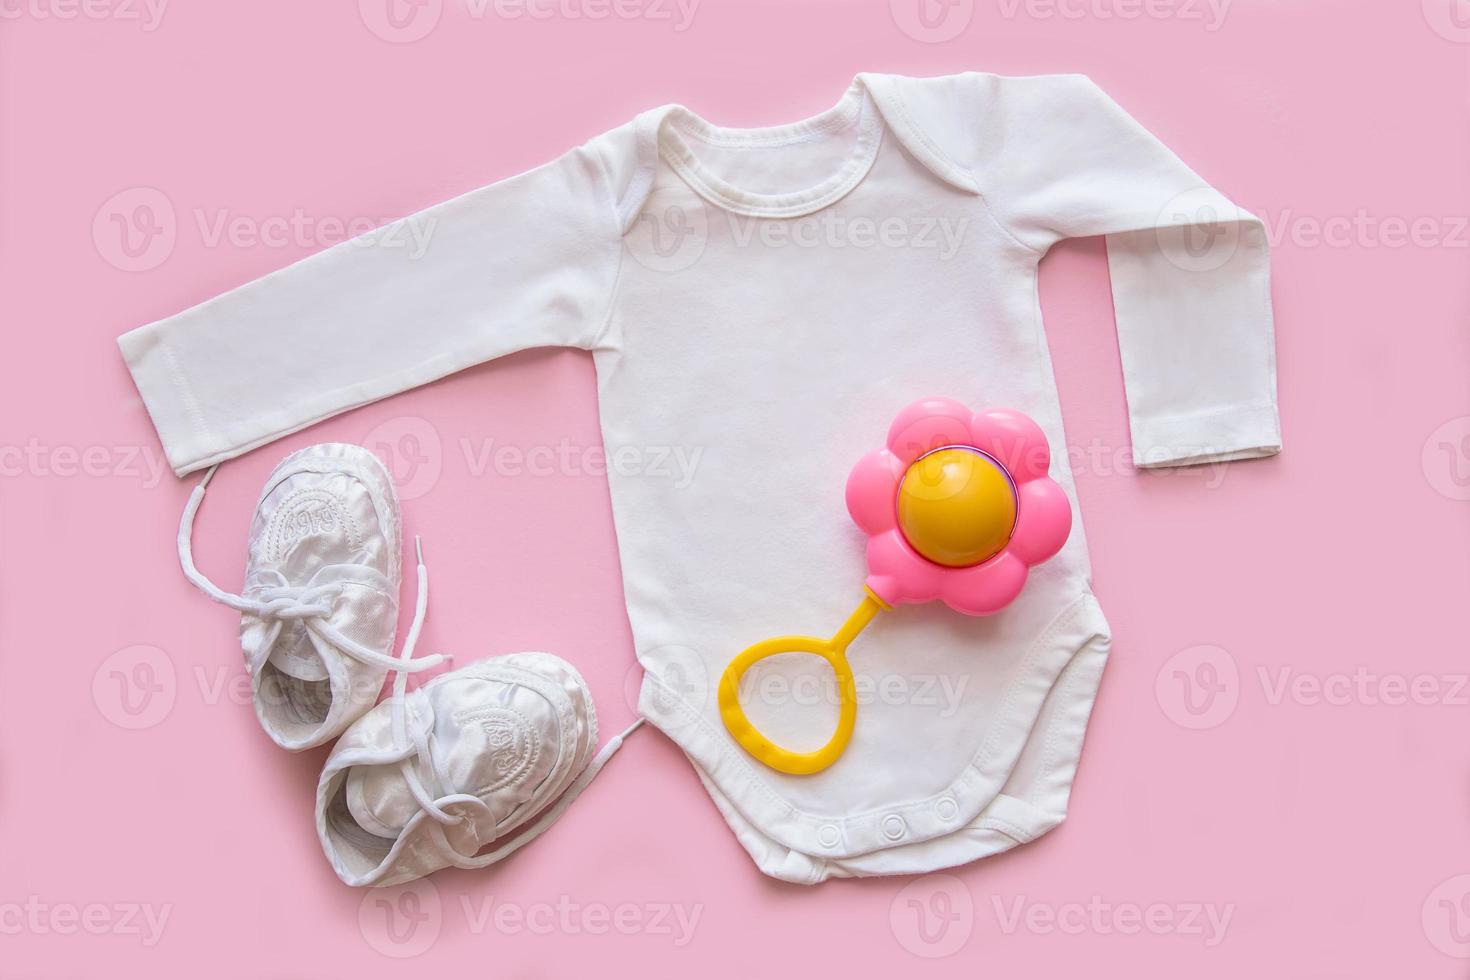 bodysuit for a newborn, rattle booties on a pink background, accessories for a newborn photo